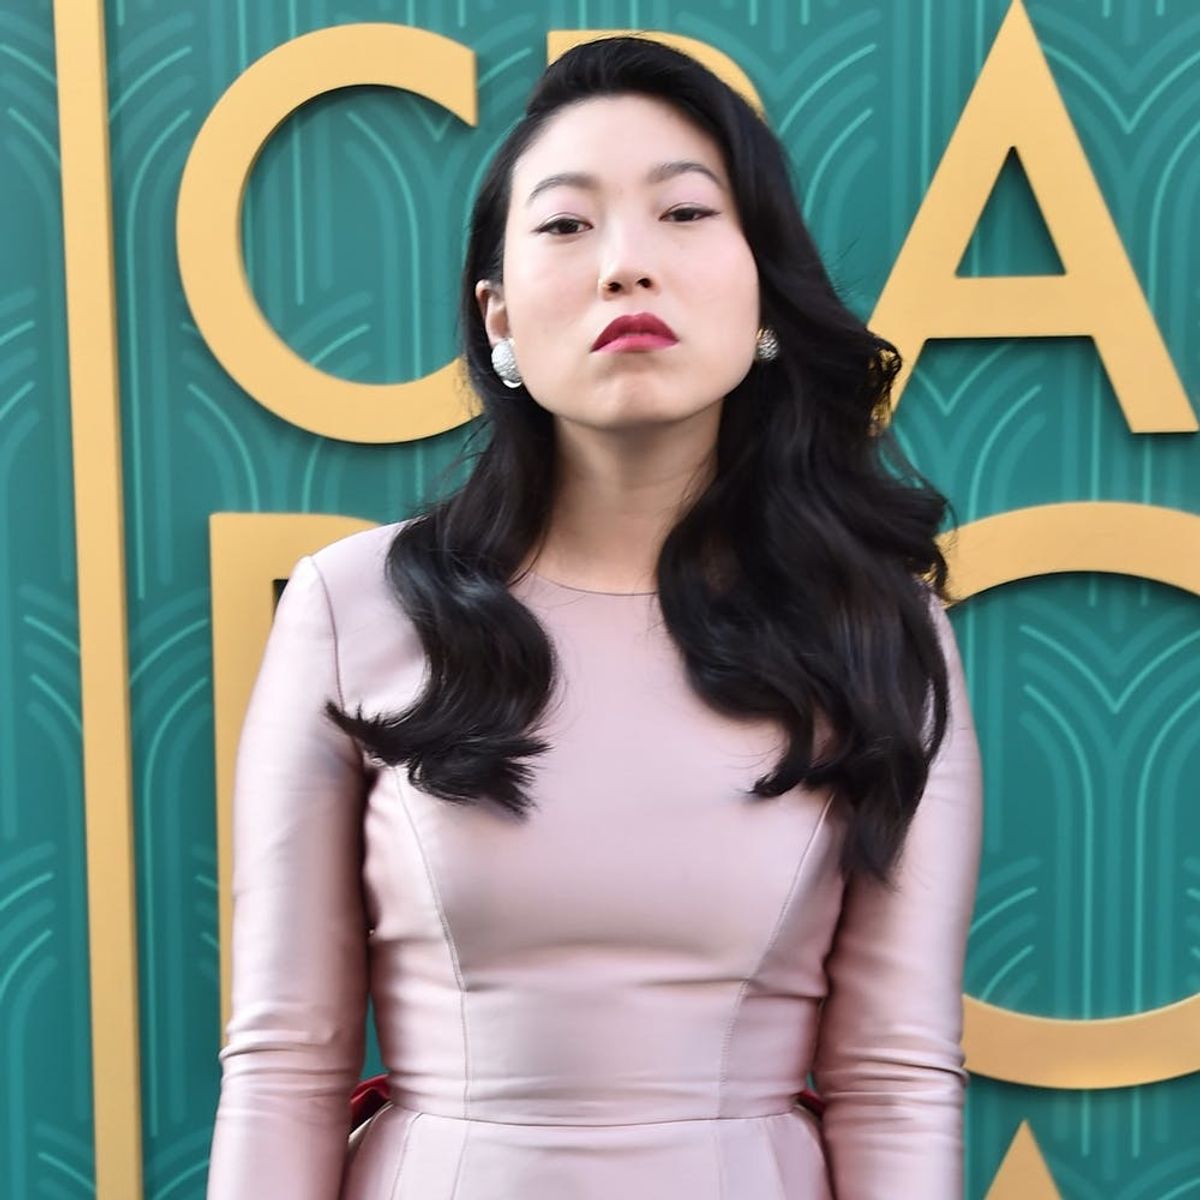 ‘Crazy Rich Asians’ Star Awkwafina Wrote a Heartfelt Note About Believing in Your Dreams